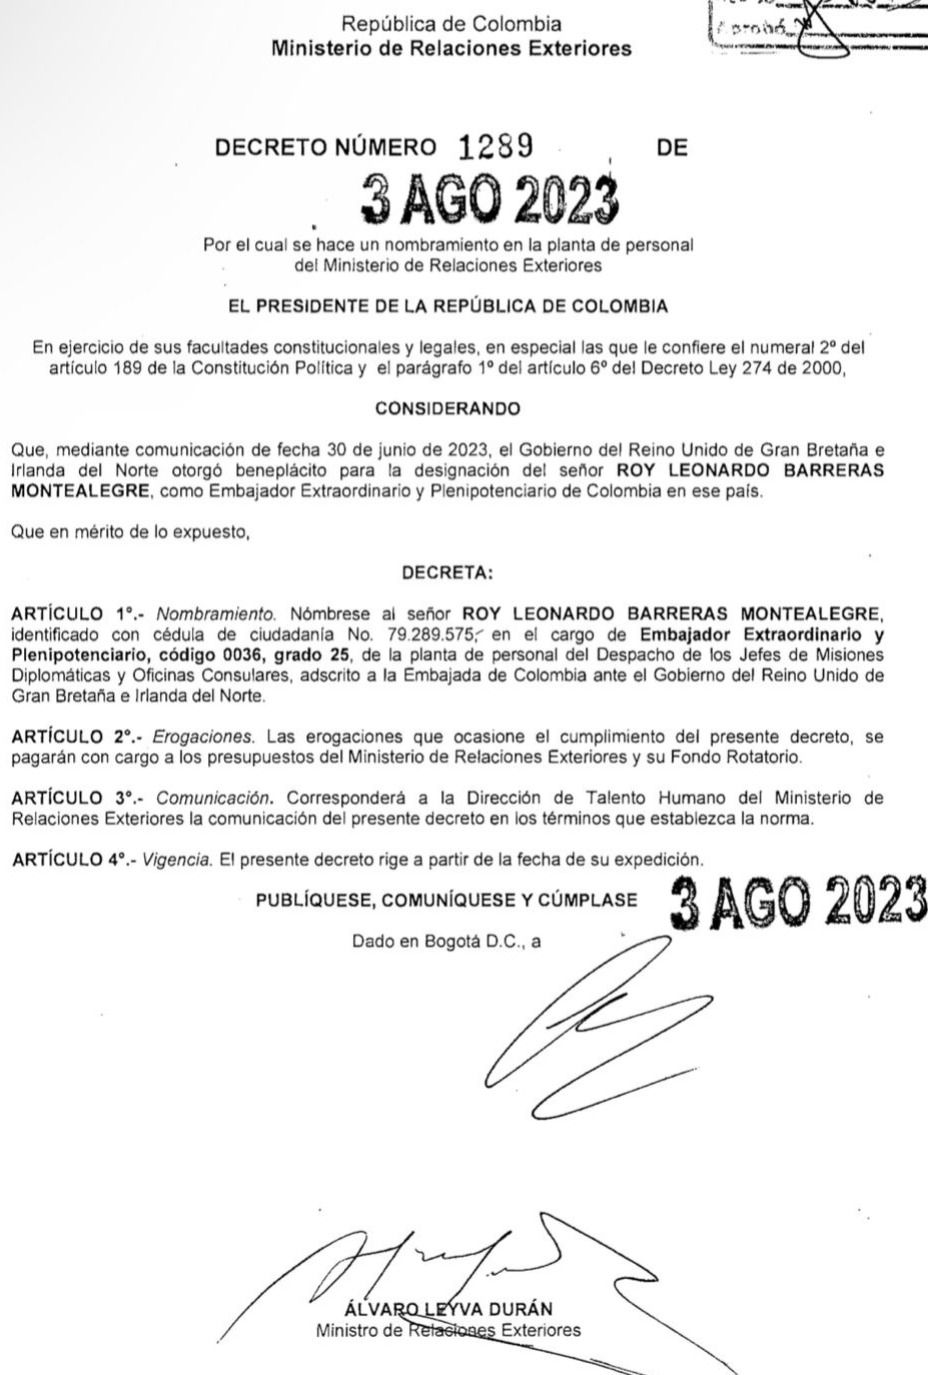 This is decree 1289 of 2023, with which the appointment of Roy Barreras as ambassador of Colombia to the United Kingdom was confirmed.